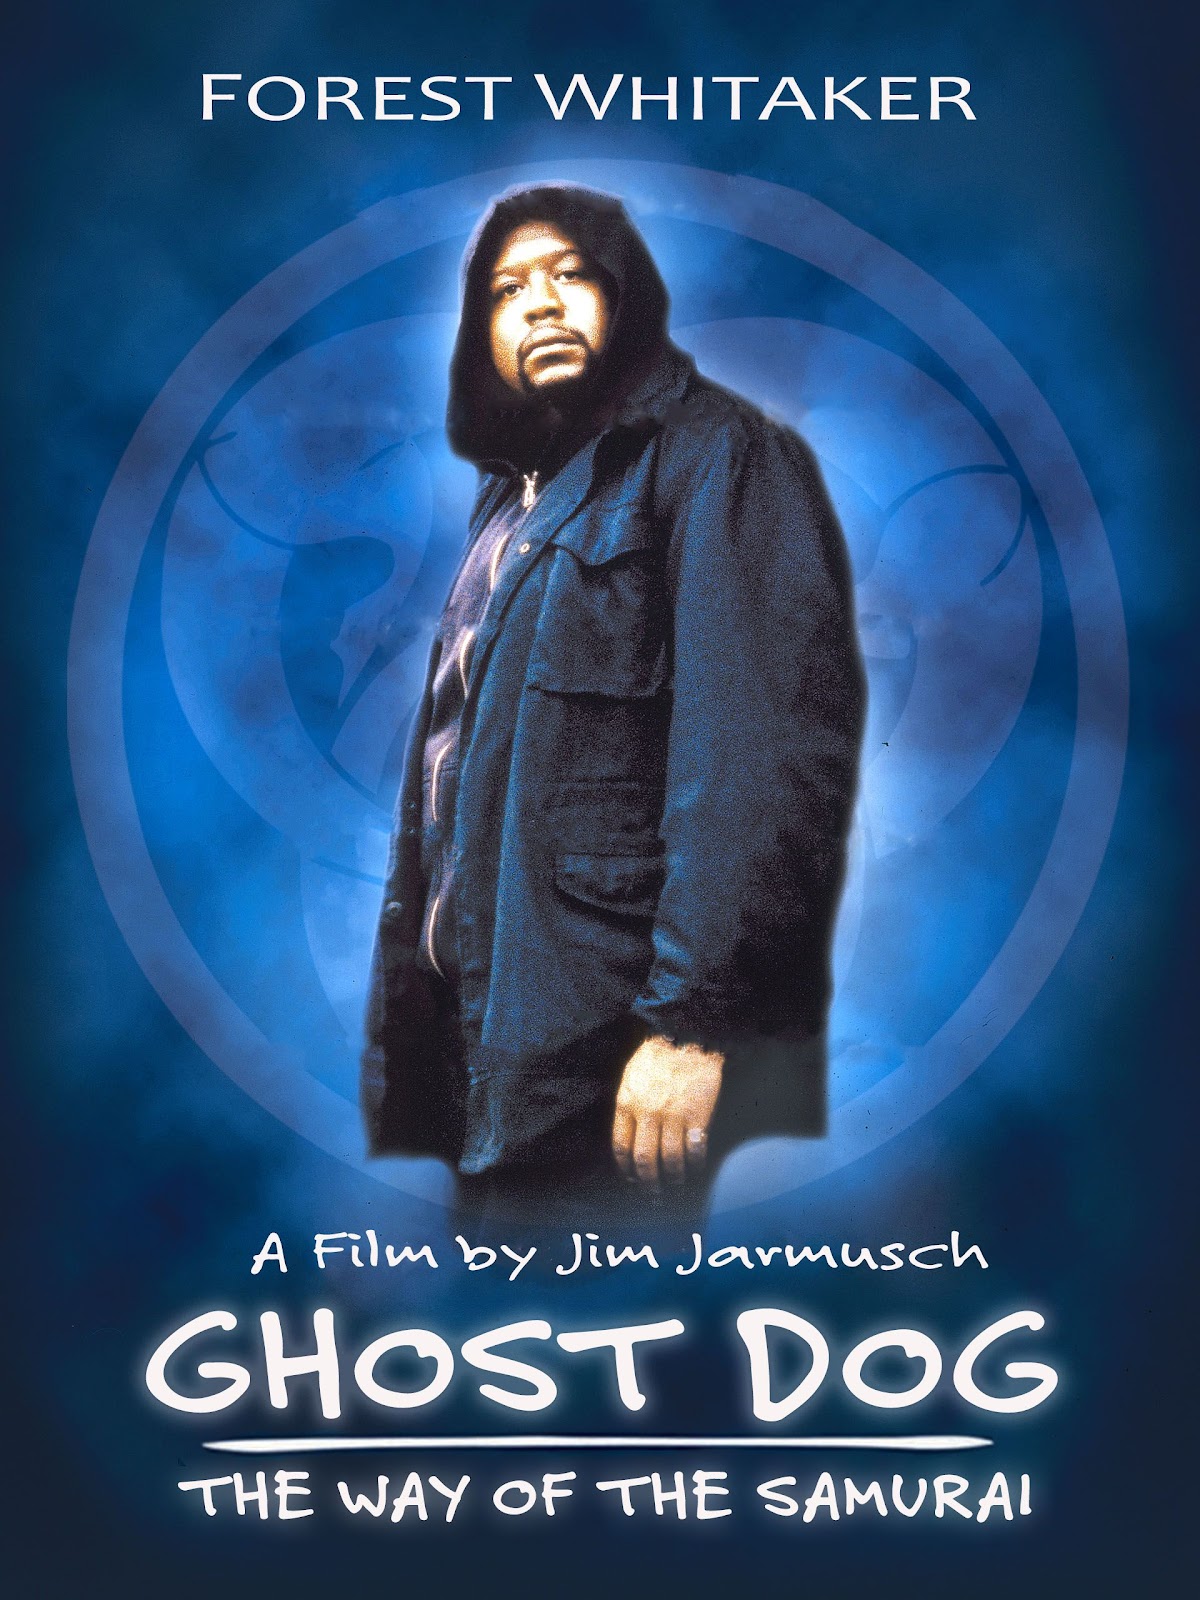 Ghost Dog - Way of The Samurai - Poster starring Forest Whitaker